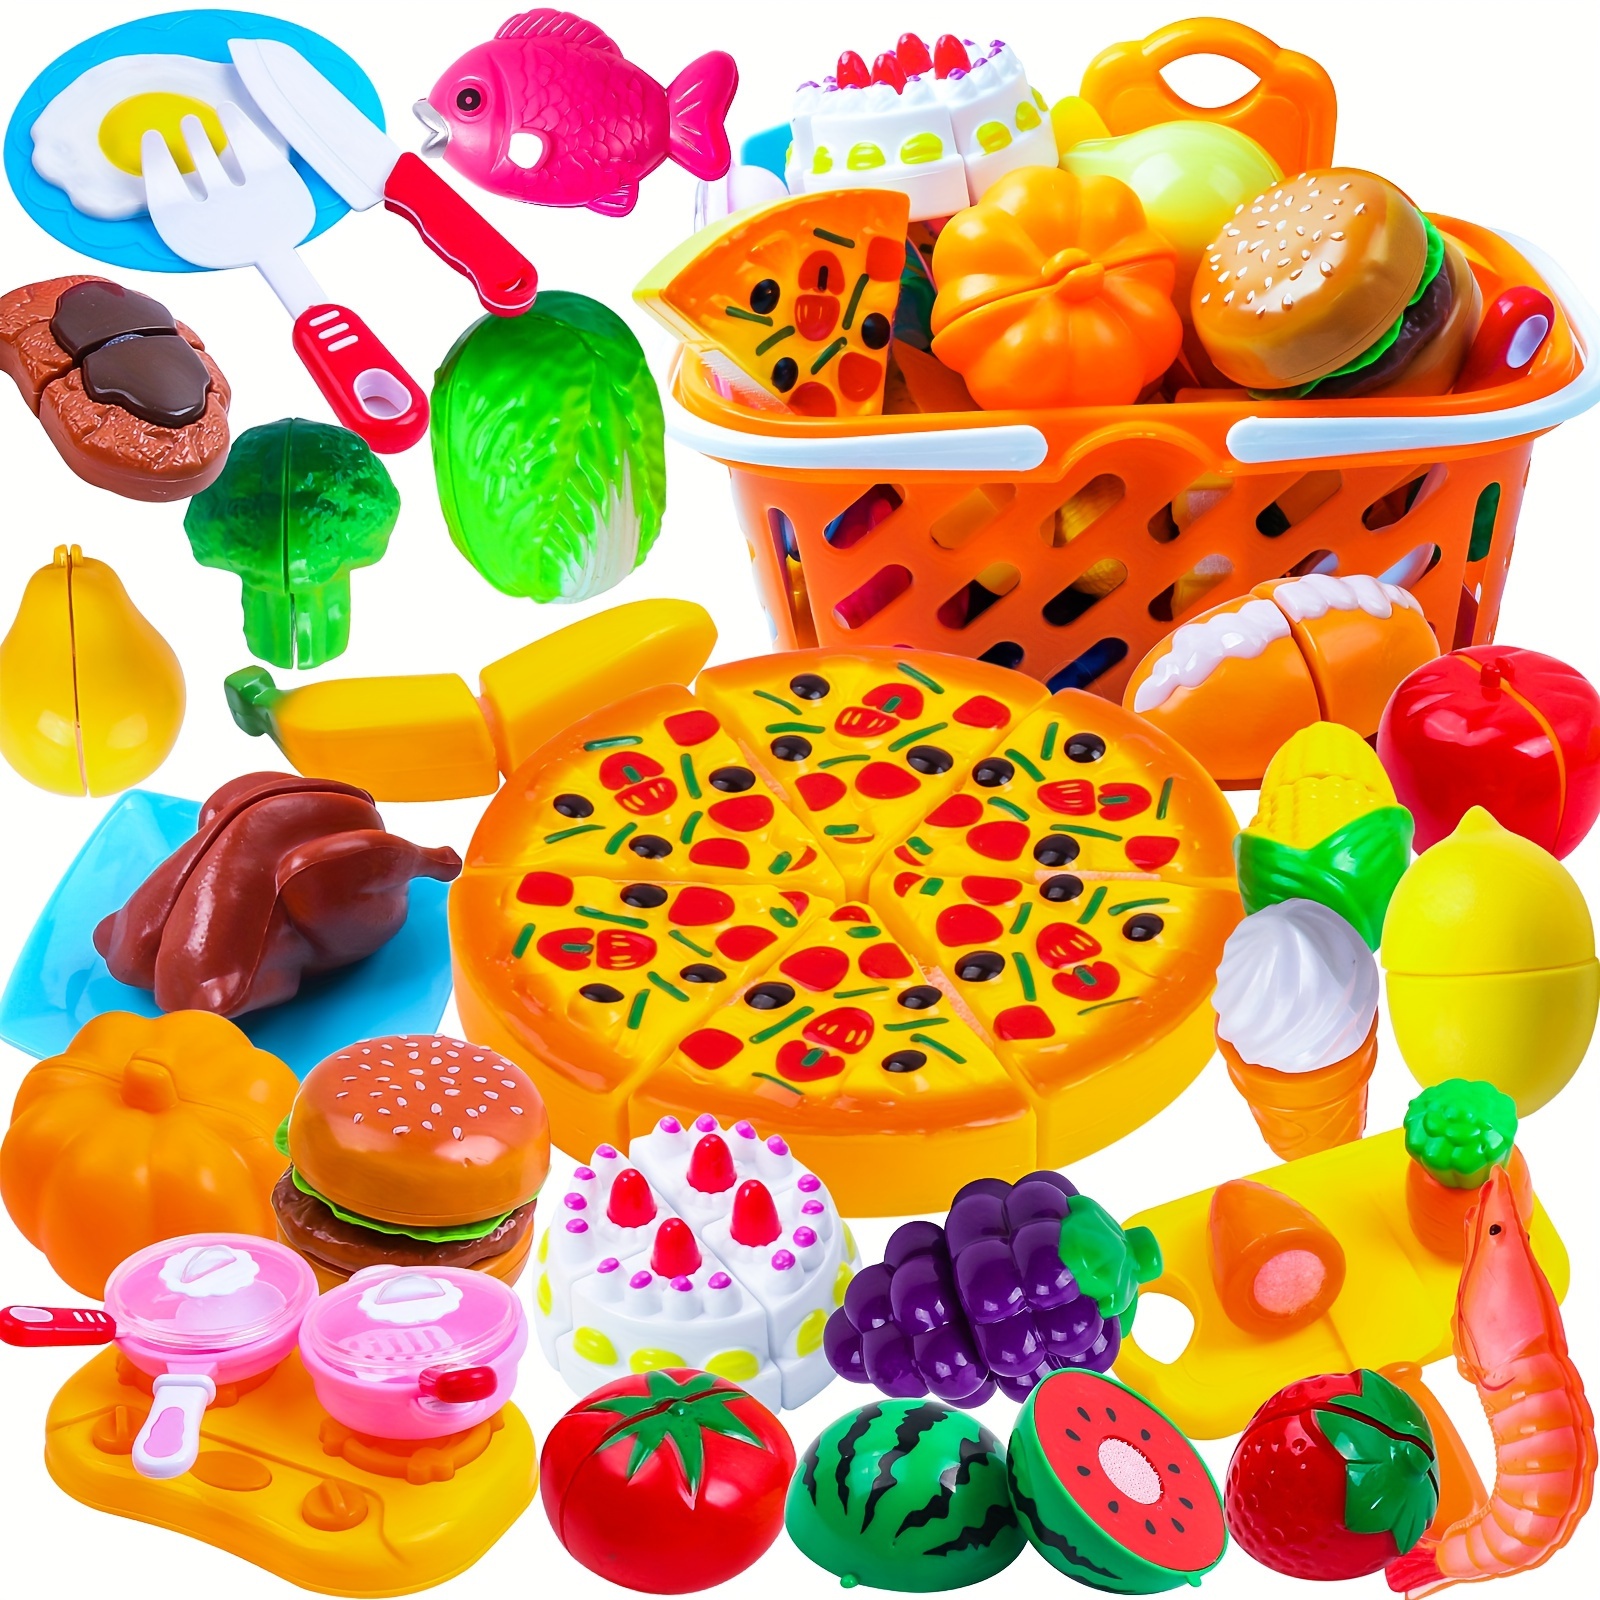 

66pcs Pretend Role Play Food Toy Set, Kids Cutting Fruit And Food Toy Set With Basket, Colourful Play Food Plastic Toy, Early Educational Take Apart And Assemble Toy For Boys And Girls Aged 3+